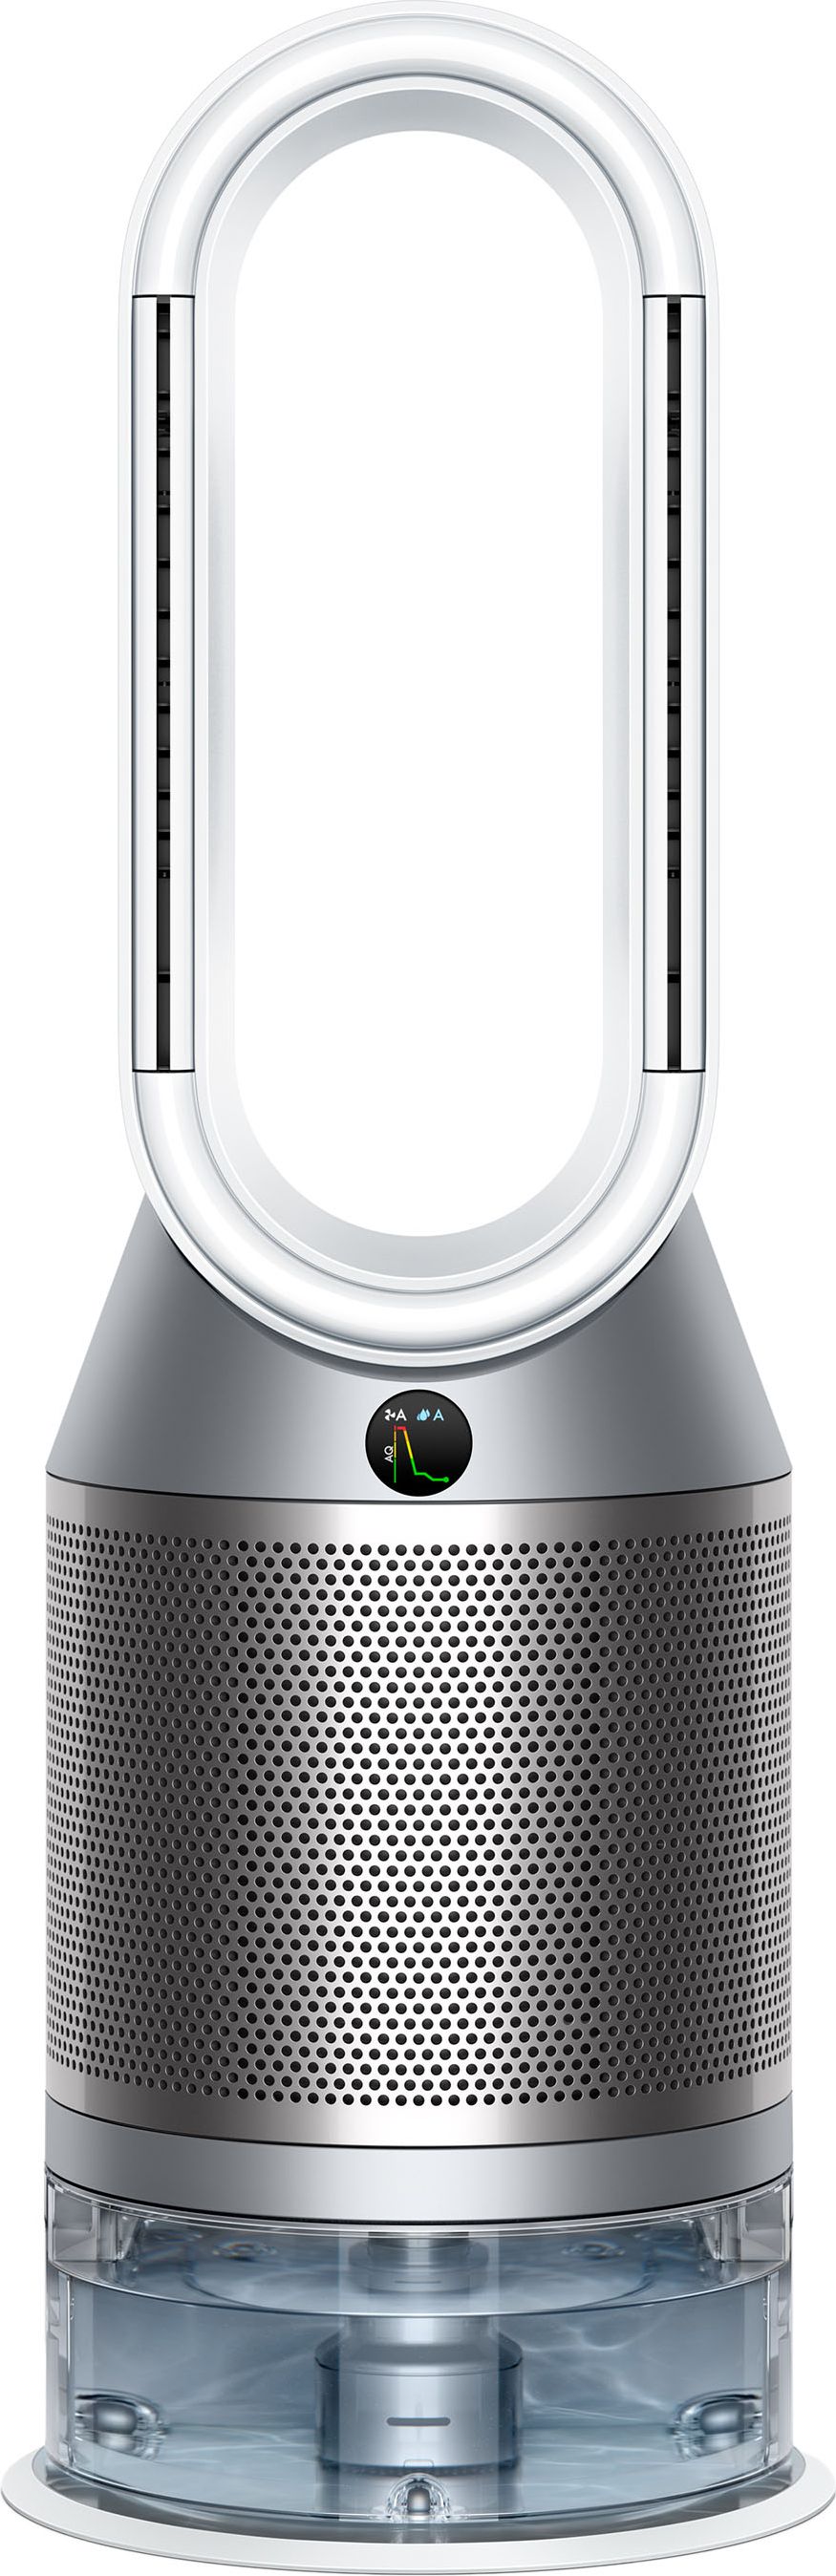 Dyson Humidify+Cool Auto React PH3A Air Purifier with Fan Cooling - White / Nickel, White